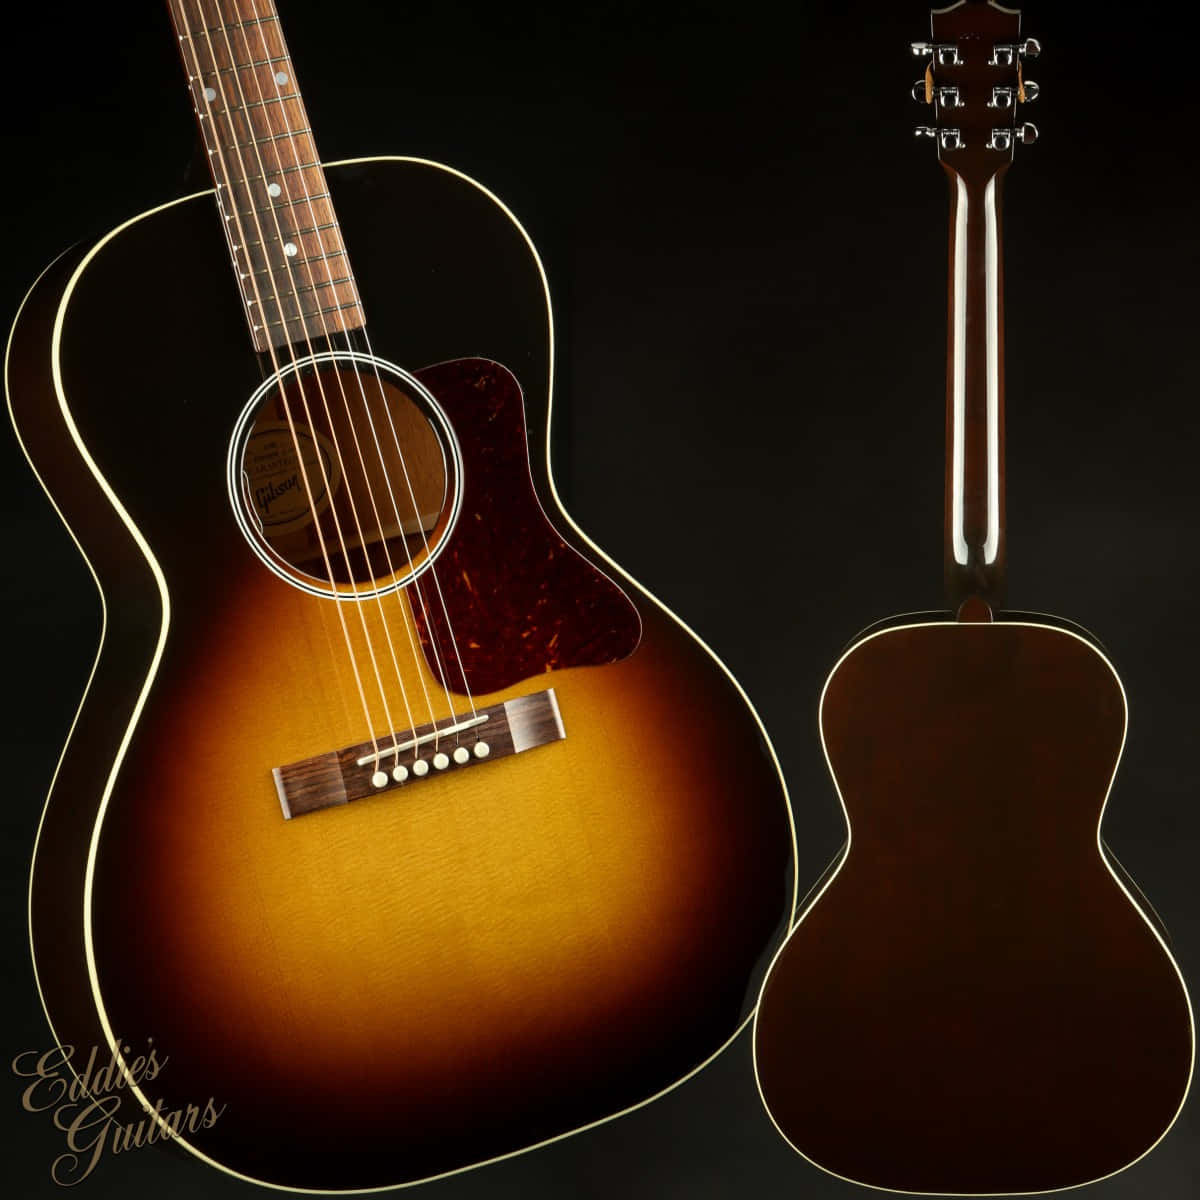 A Guitar With A Sunburst Finish And A Black Background